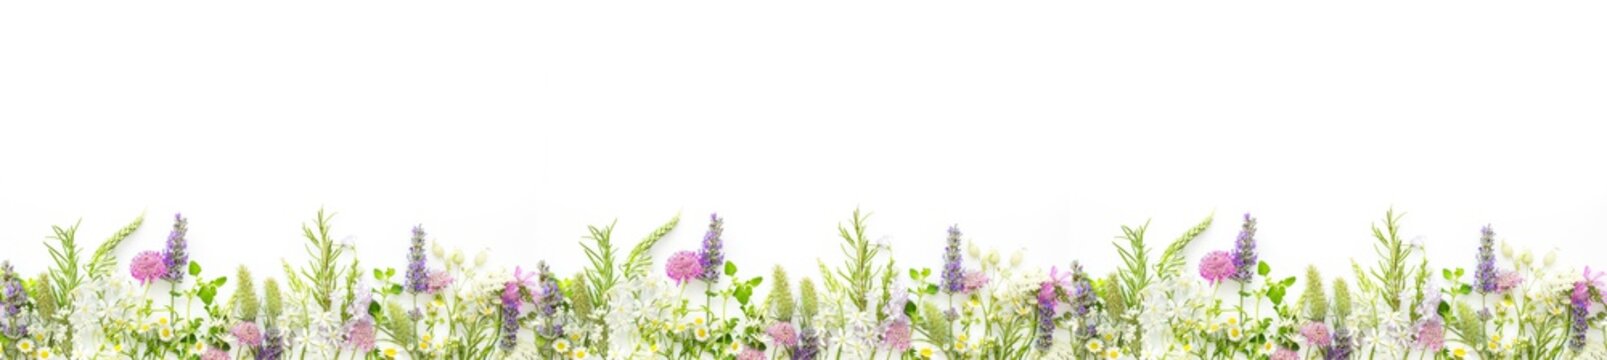 Composition of wild flowers and aromatic herbs on a white background.